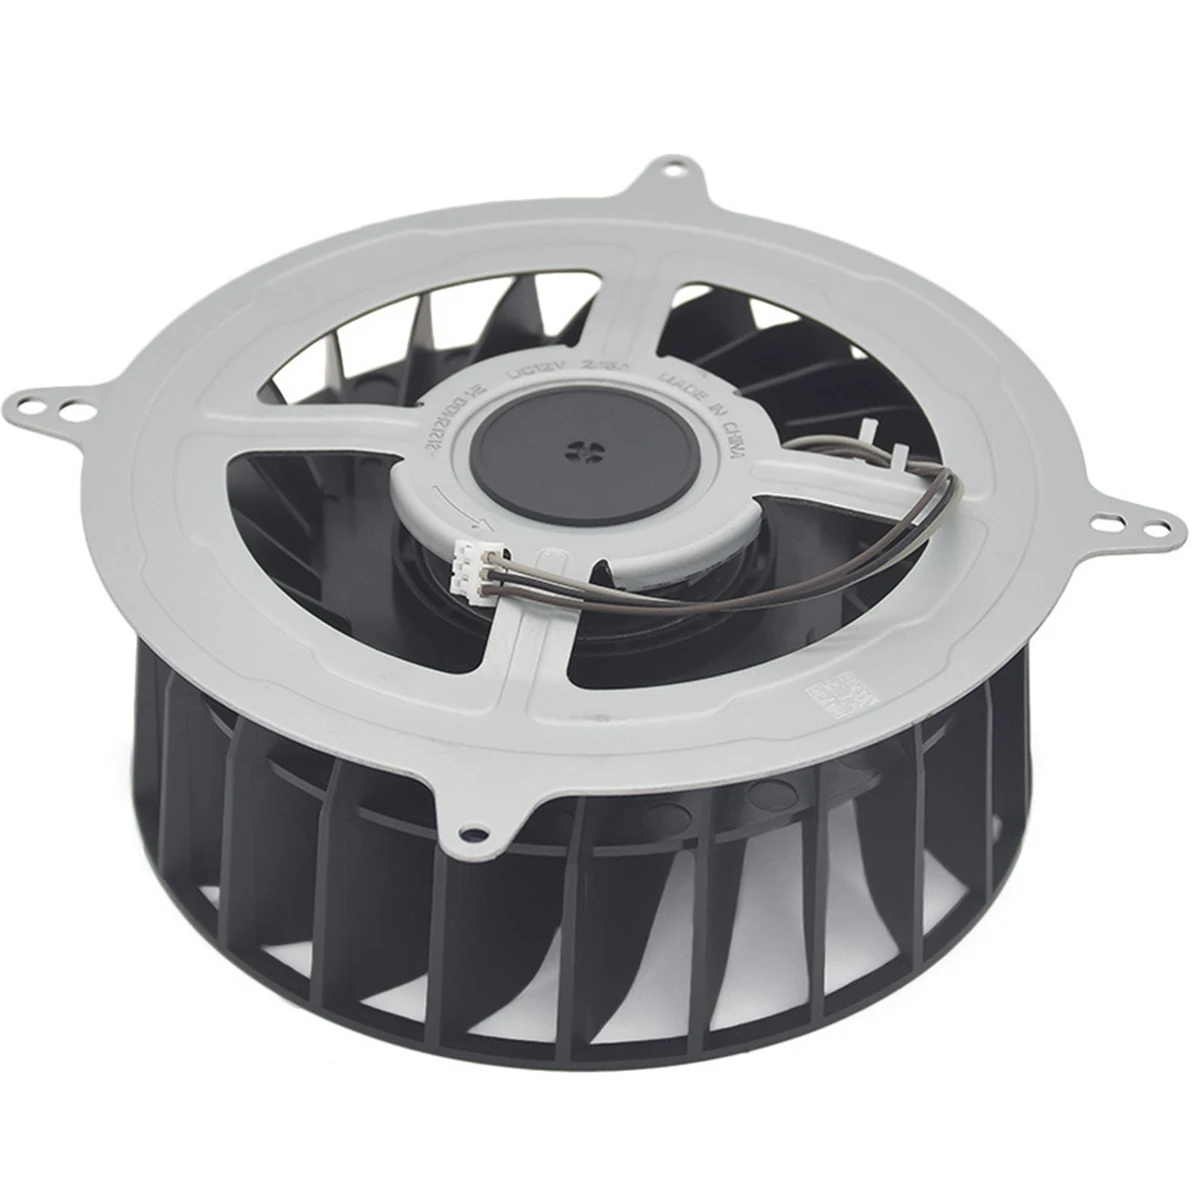 

Suitable for PS5 Built-in Fan 23 Blades for Ps5 Host Cooling